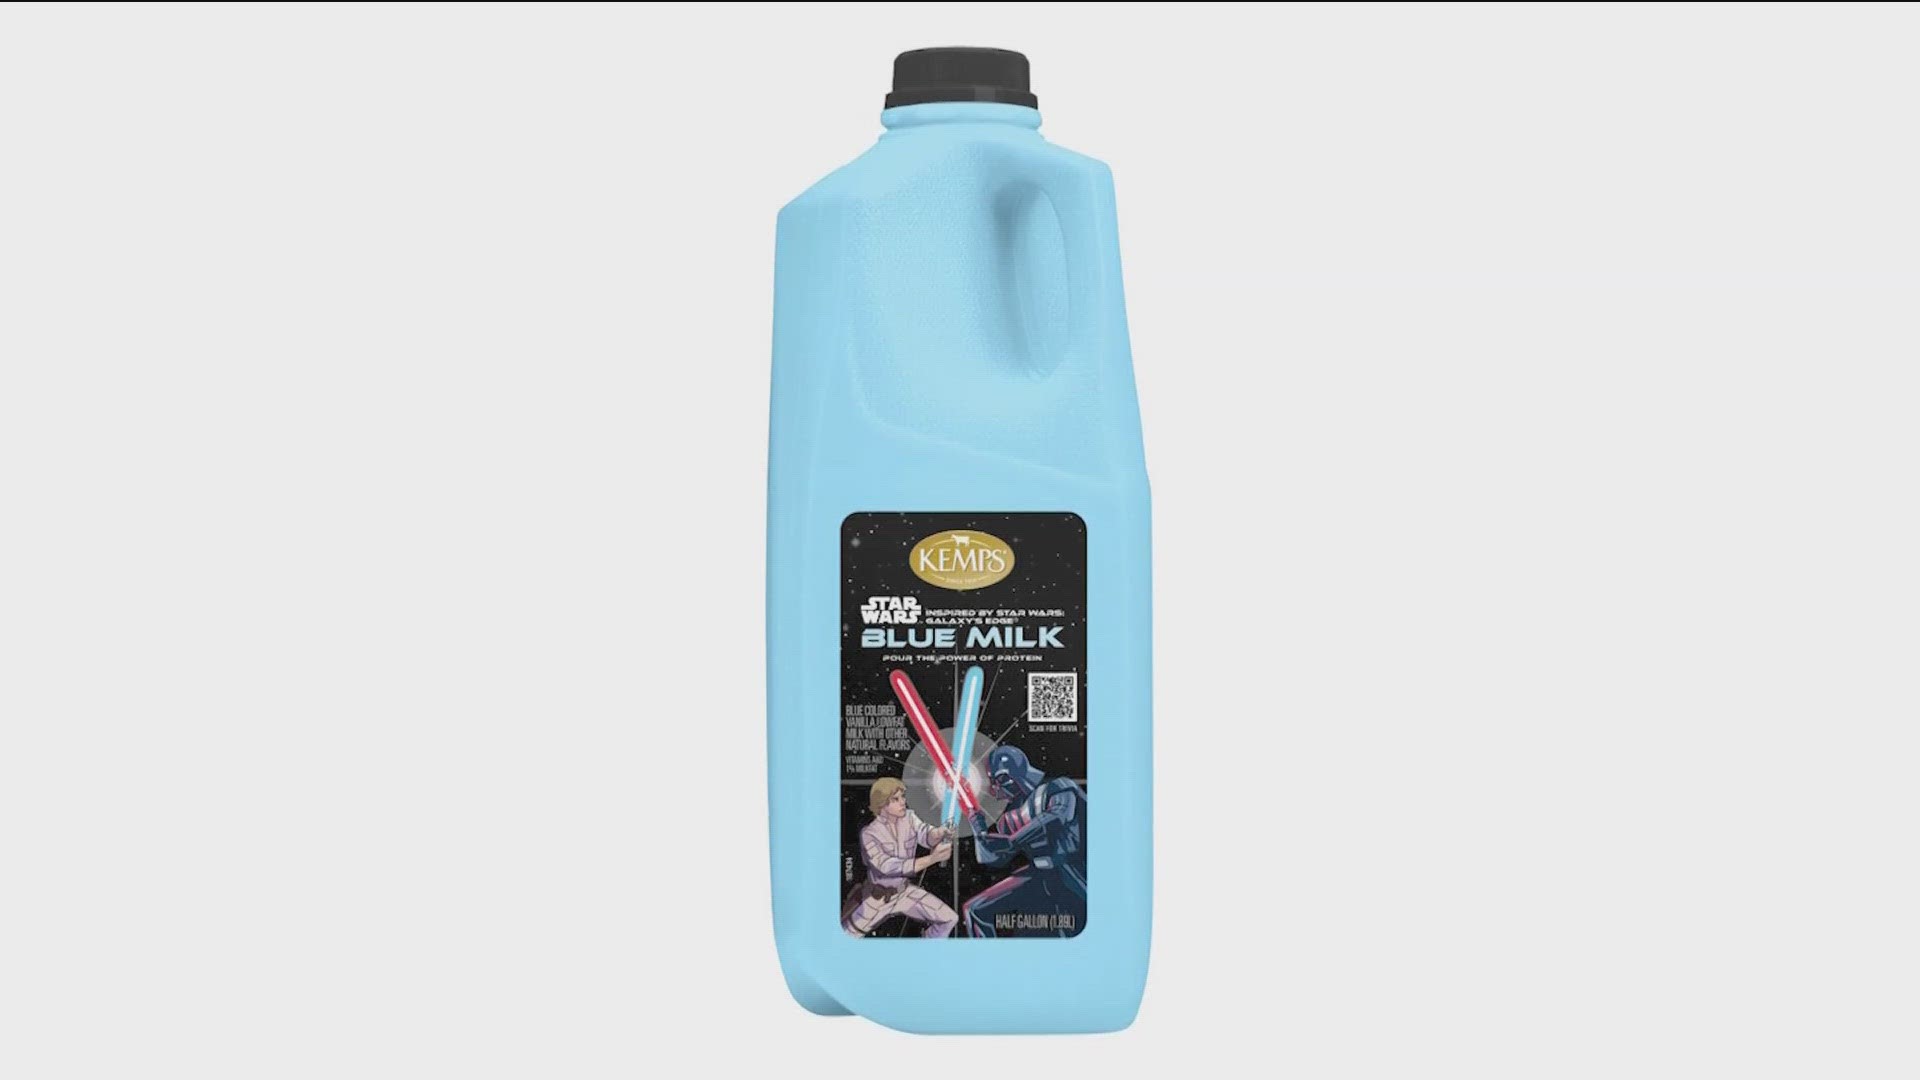 The drink is being offered in half-gallon jugs at Cub, Hy-Vee, Coborn's, Walmart and Target, according to the release, and will be available through July.